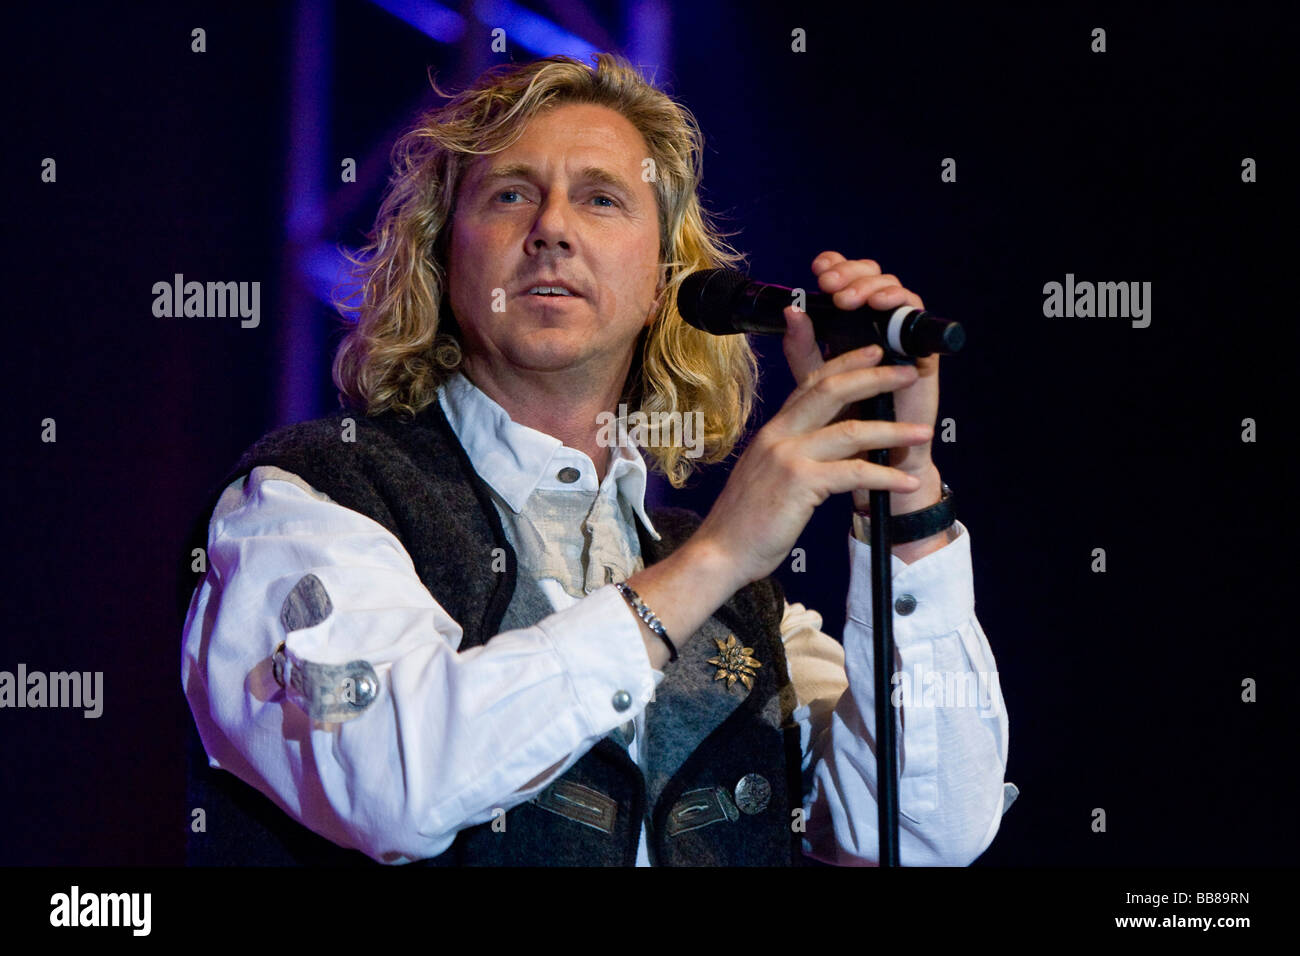 Swiss schlager singer Christian Duss performing live at the 9th Schlager Nacht at Festhalle Allmend concert hall, Lucerne, Swit Stock Photo